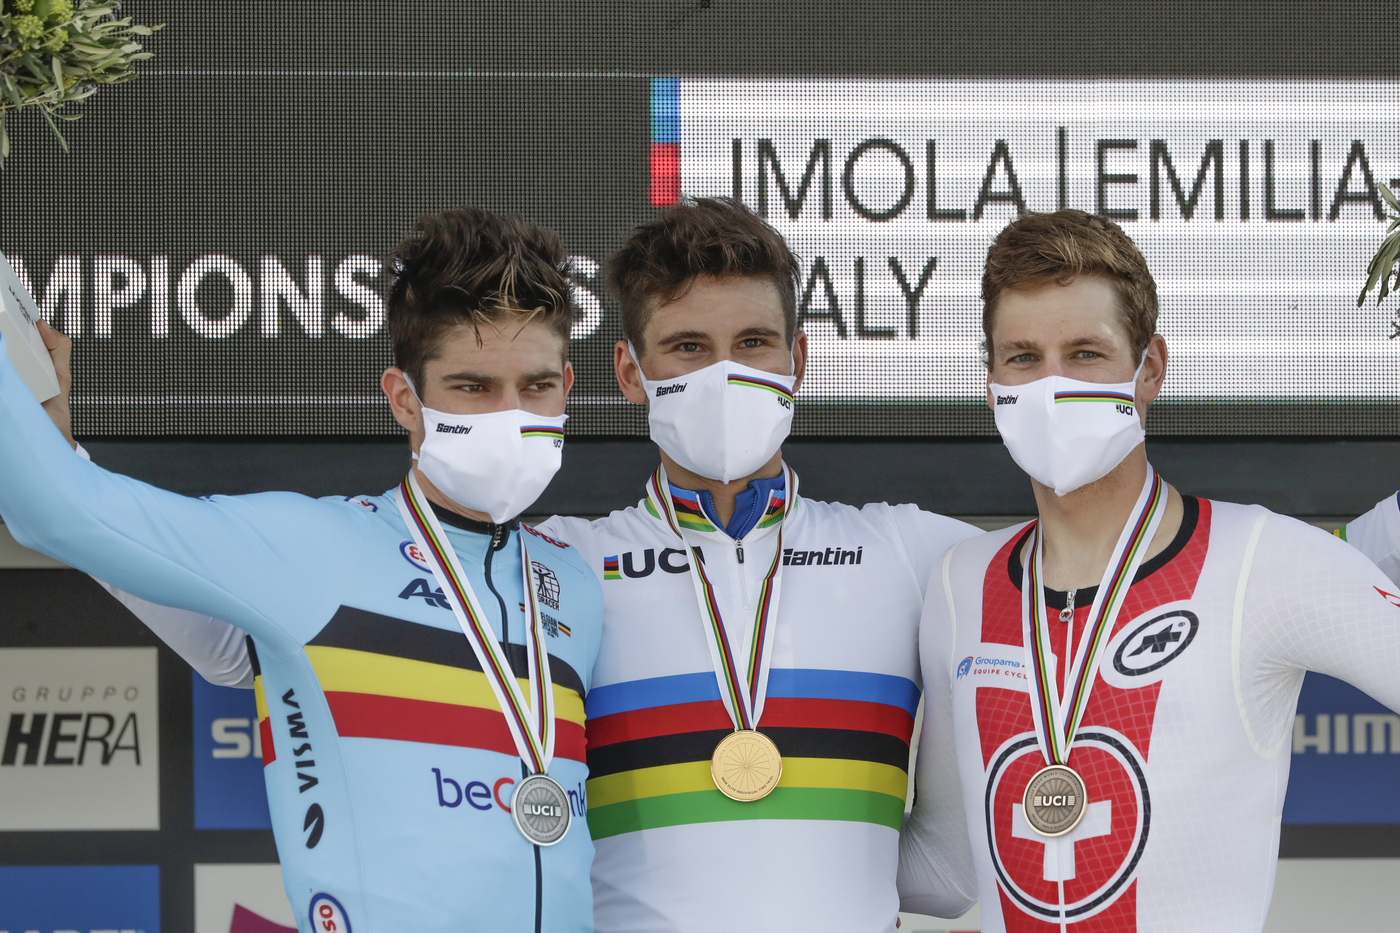 Italy's Filippo Ganna, center, winner of the men's Individual Time Trial event, poses on the podium with second placed Belgium's Wout van Aert, left, and third placed Switzerland's Stefan Kung, at the road cycling World Championships, in Imola, Italy, Friday, Sept. 25, 2020. (AP Photo/Andrew Medichini)